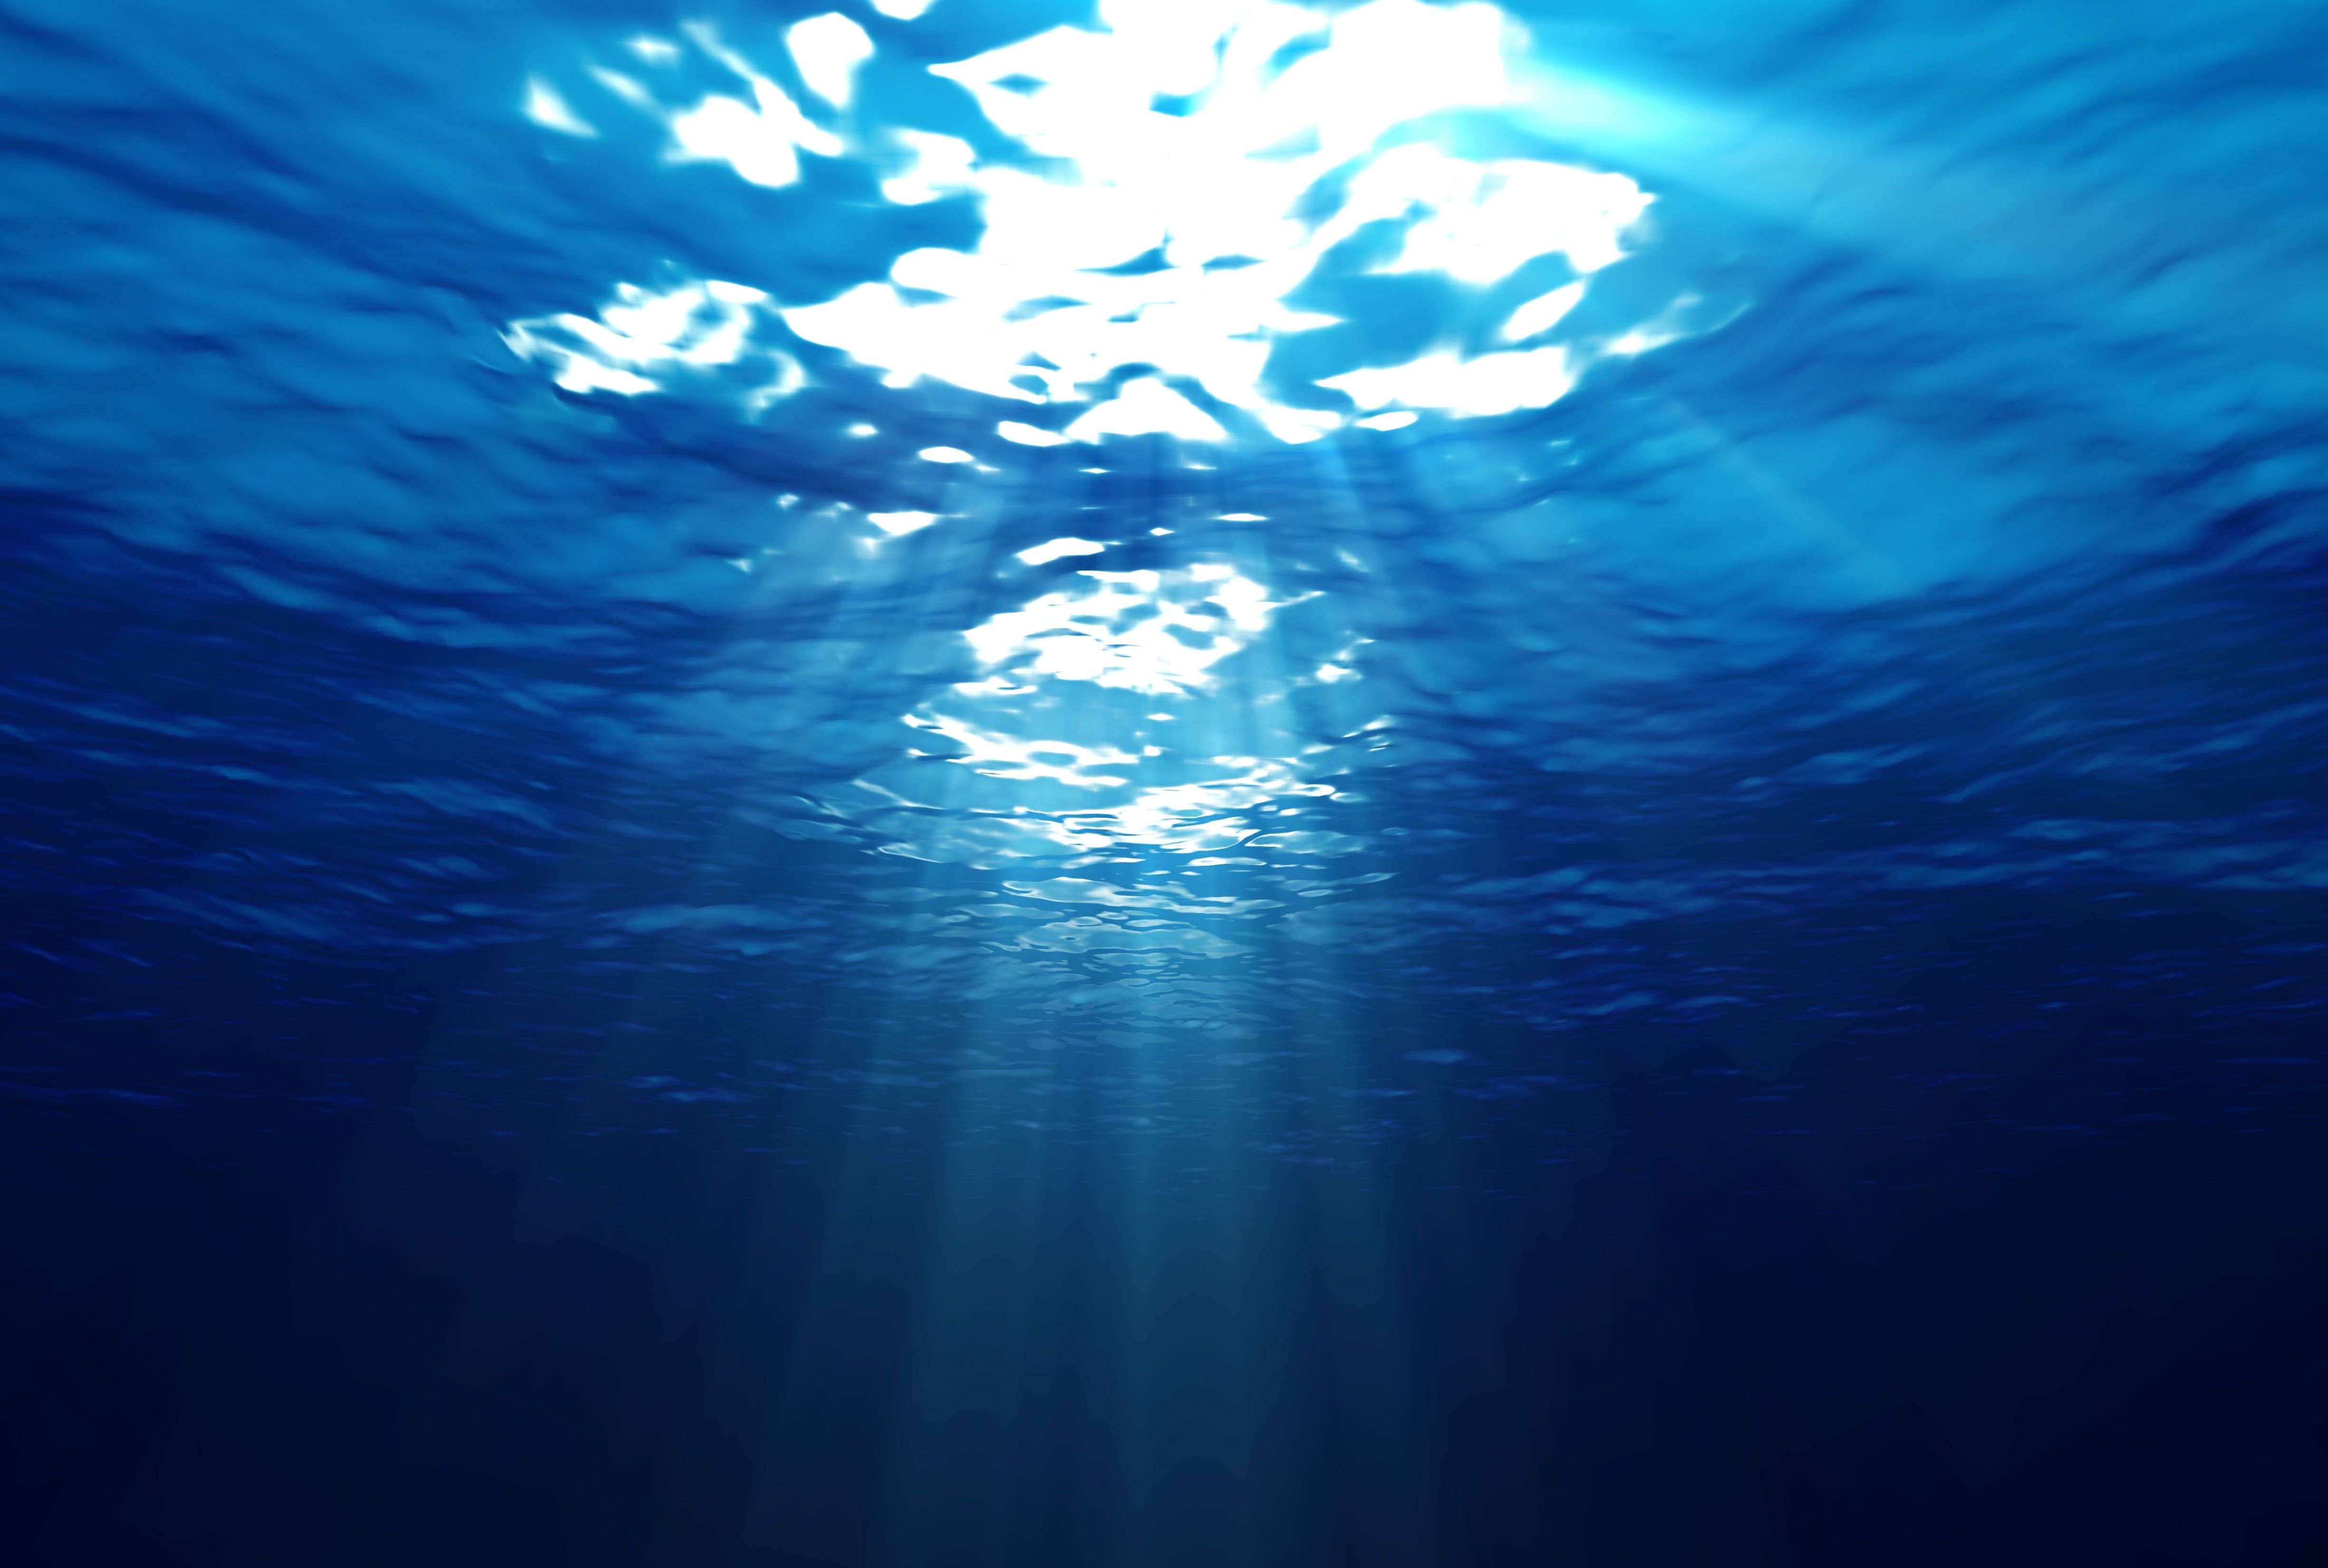 A sun ray is shining through the water - Underwater